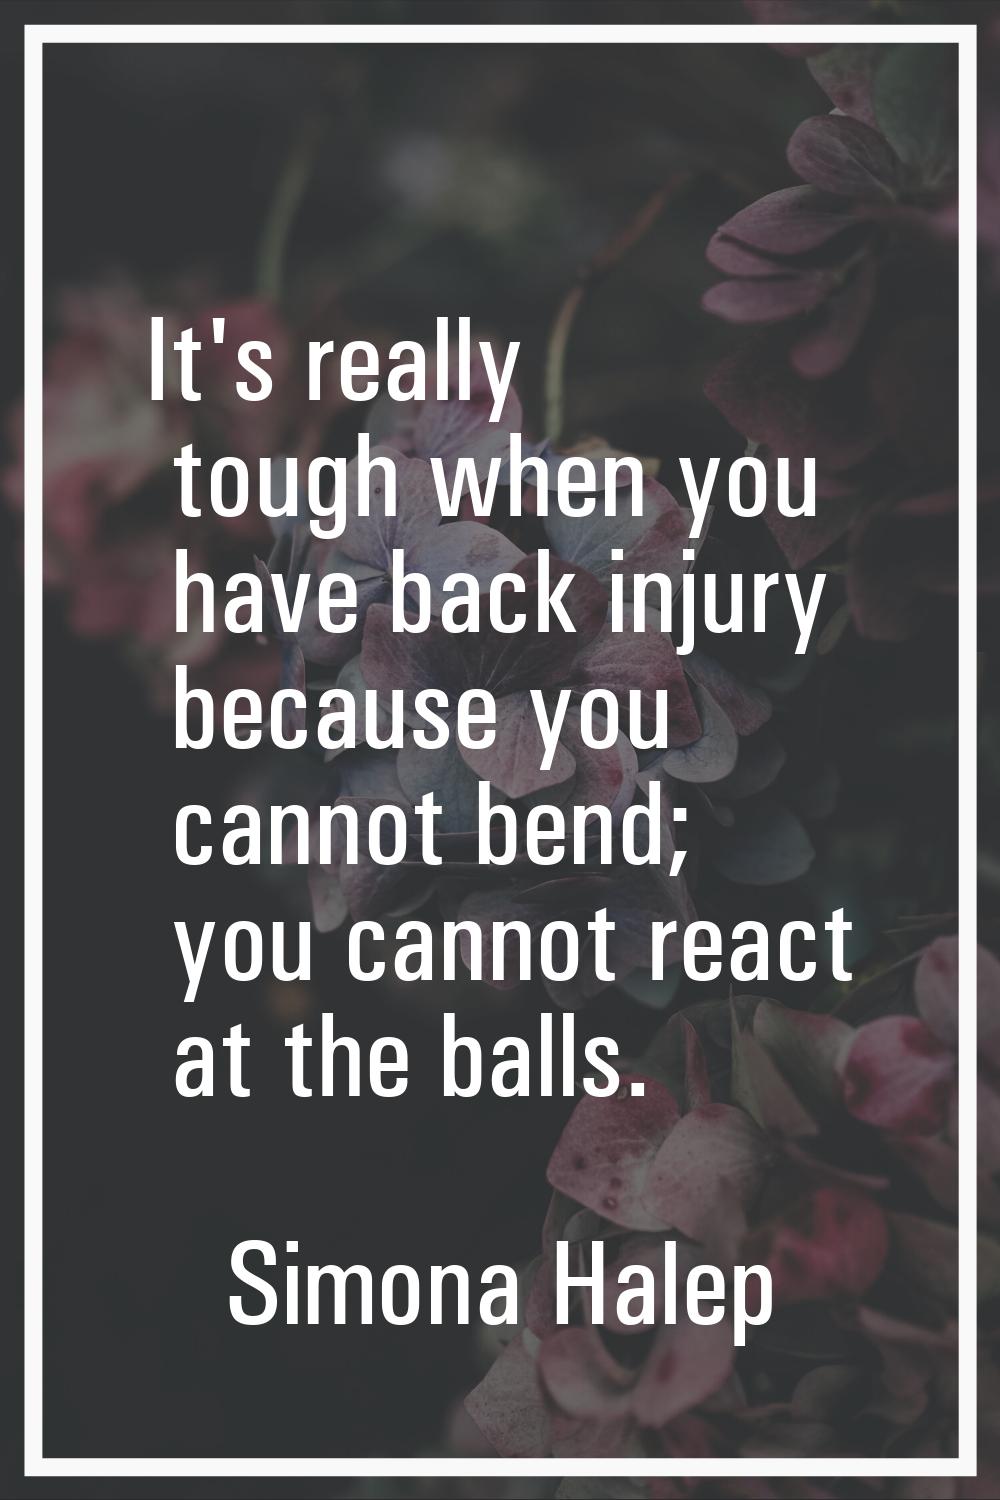 It's really tough when you have back injury because you cannot bend; you cannot react at the balls.